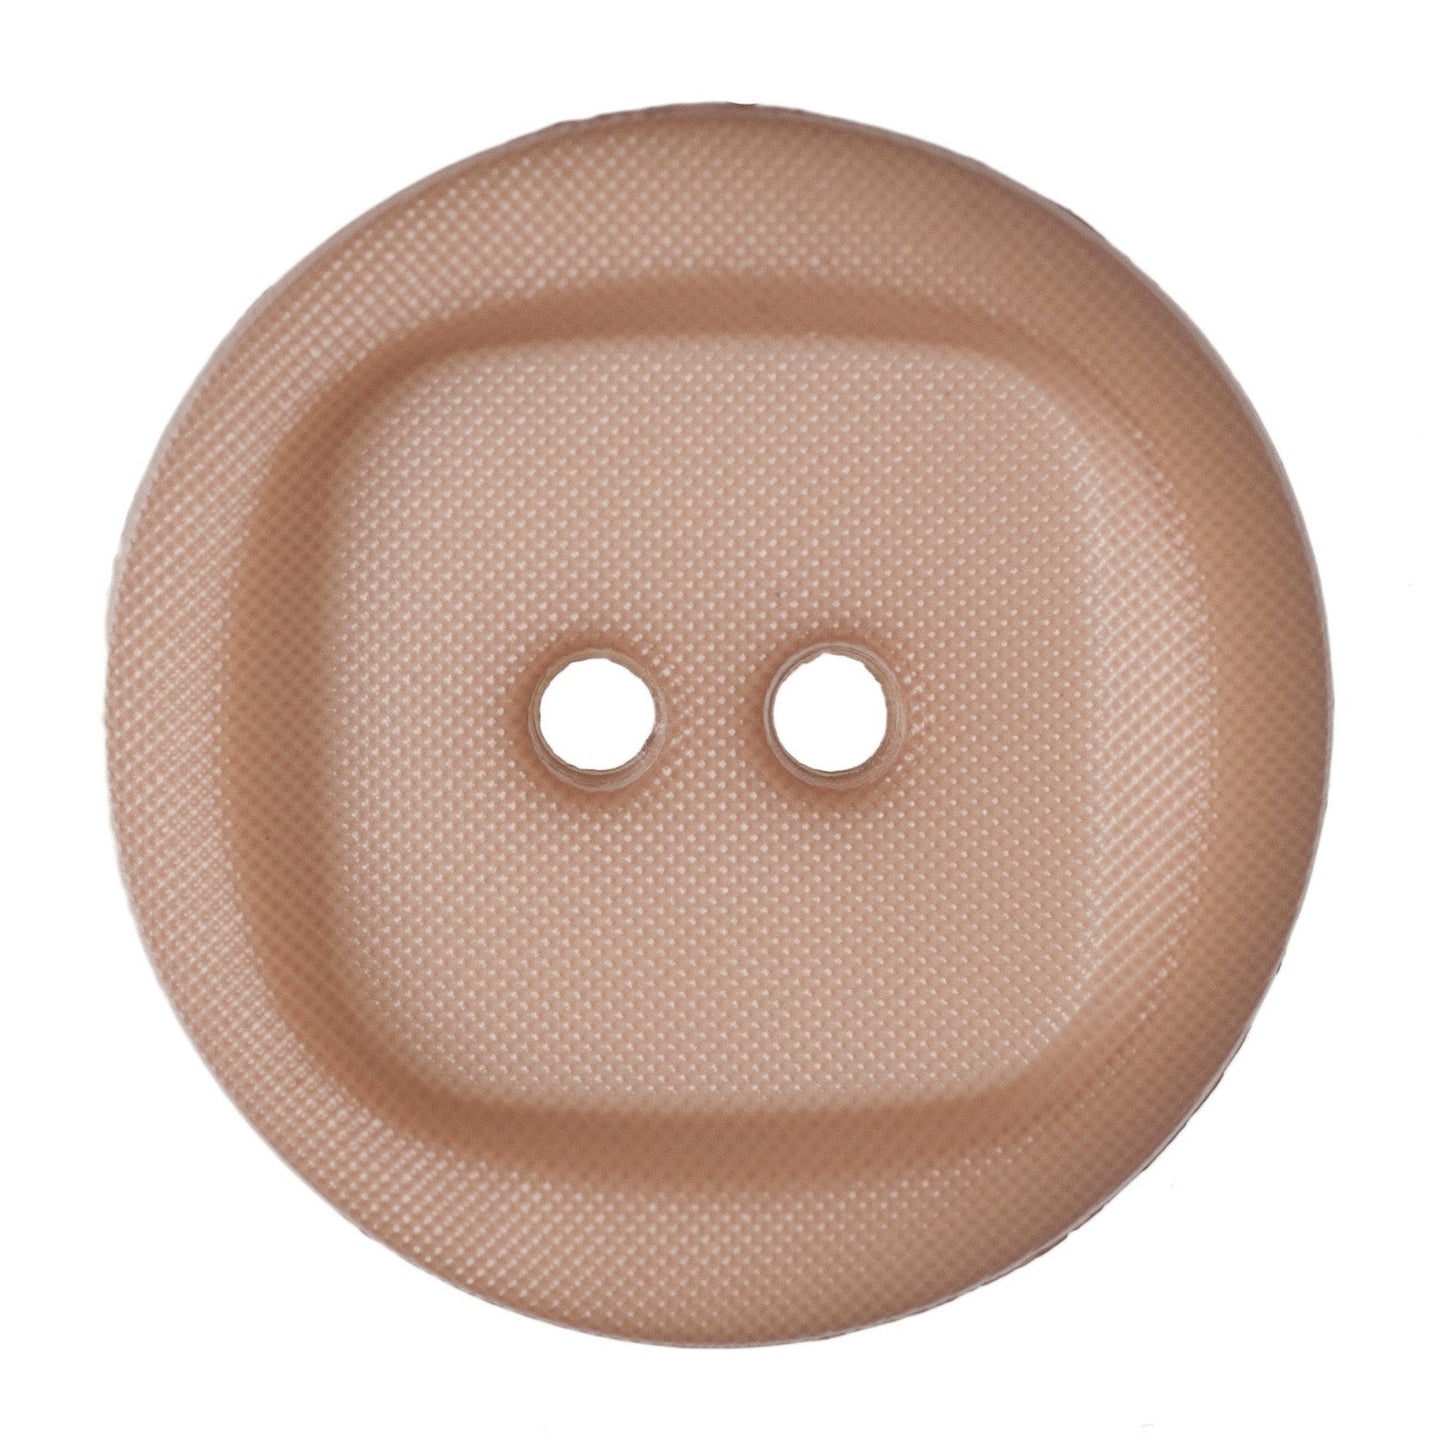 2 Hole Wavy with Square Insert Button - 24mm - Brown [LD4.8]